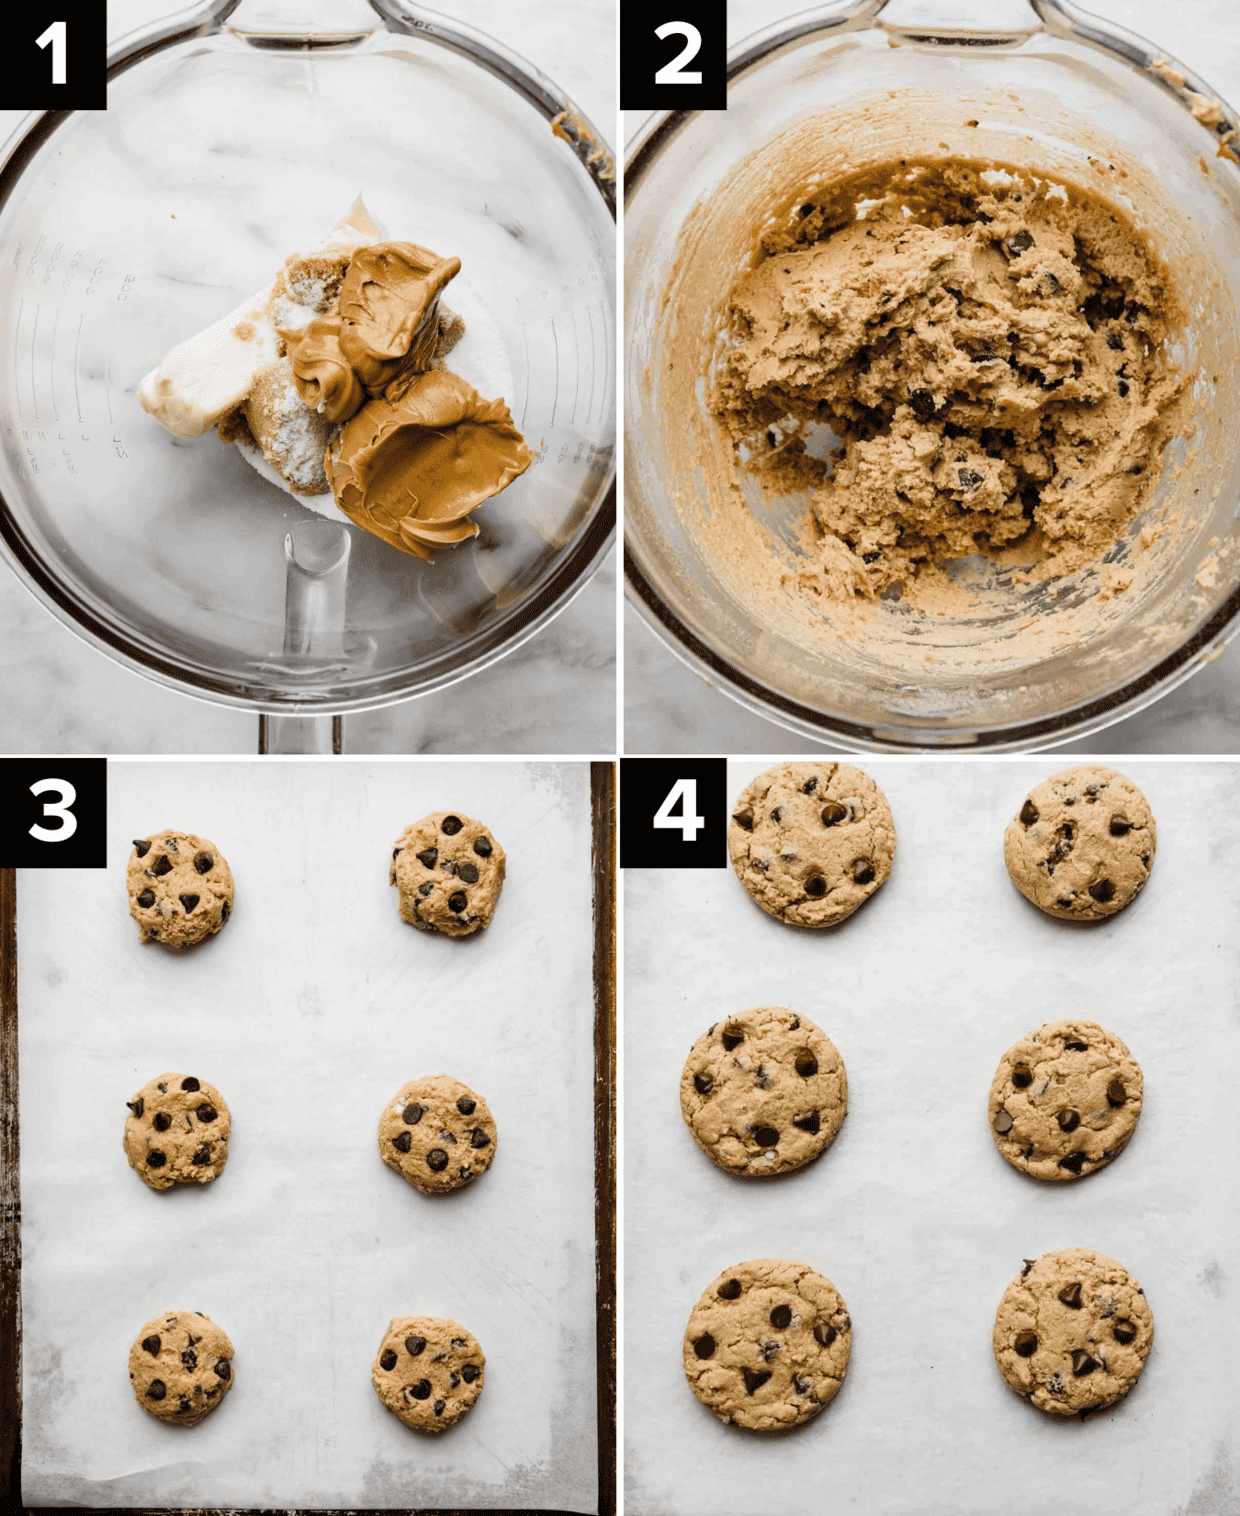 Four images showing how to make Peanut Butter Chocolate Chip Cookies, top left is glass bowl with butter, sugar and peanut butter in it, top right image is Peanut Butter Chocolate Chip Cookie dough in a glass bowl, bottom left photo is six cookie dough balls on a baking sheet, bottom right image is six baked Peanut Butter Chocolate Chip Cookies on a white parchment covered baking sheet.